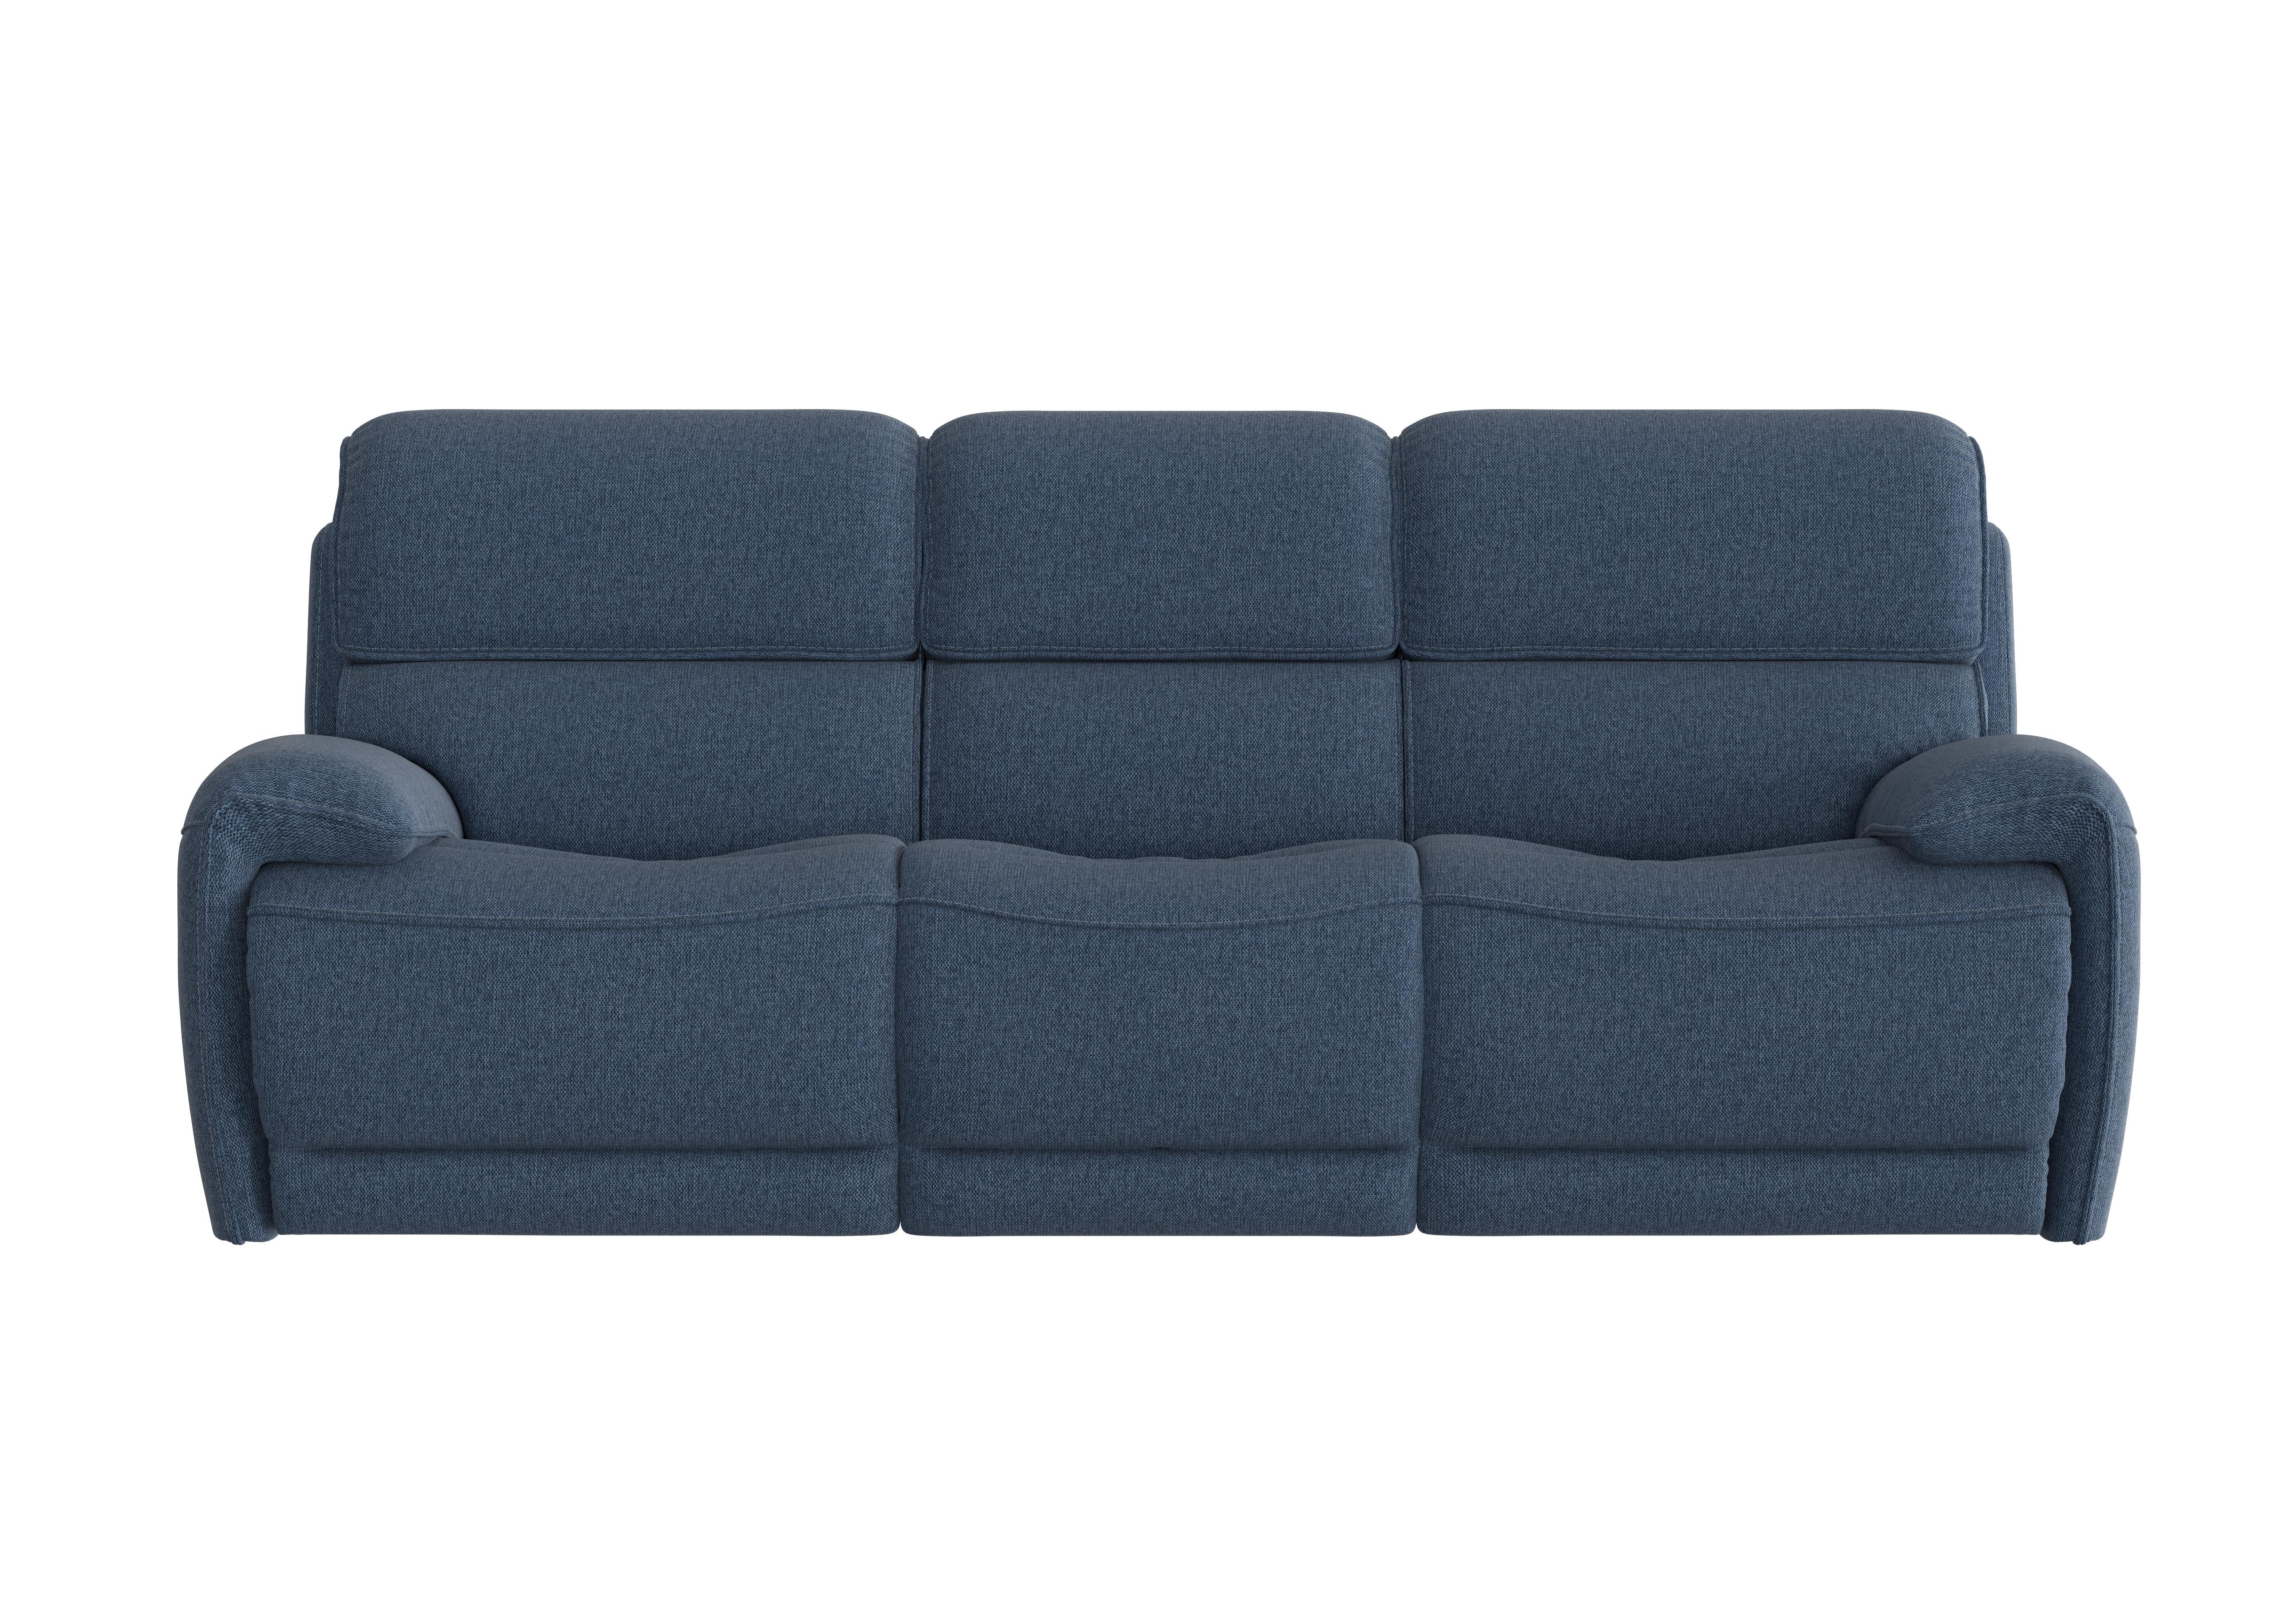 Link 3 Seater Fabric Power Recliner Sofa with Power Headrests in Fab-Blt-R38 Blue on Furniture Village